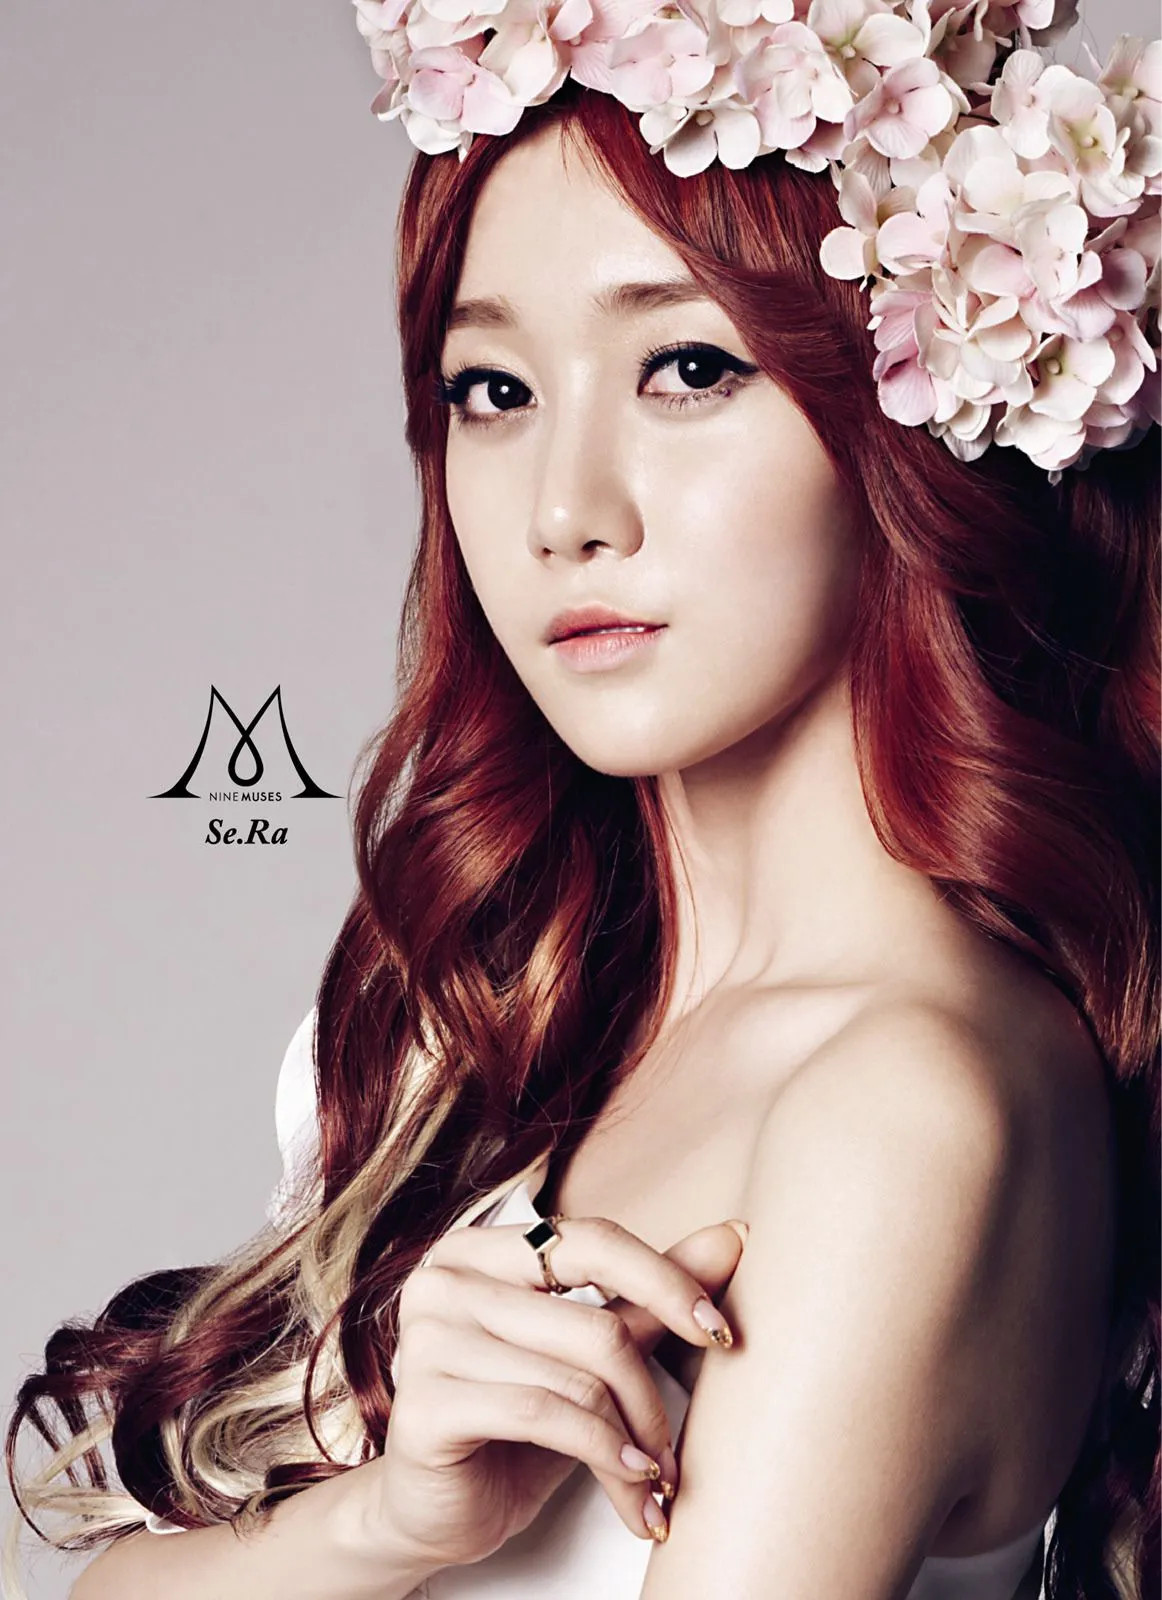 1800x1200 nine muses wallpaper - Coolwallpapers.me!